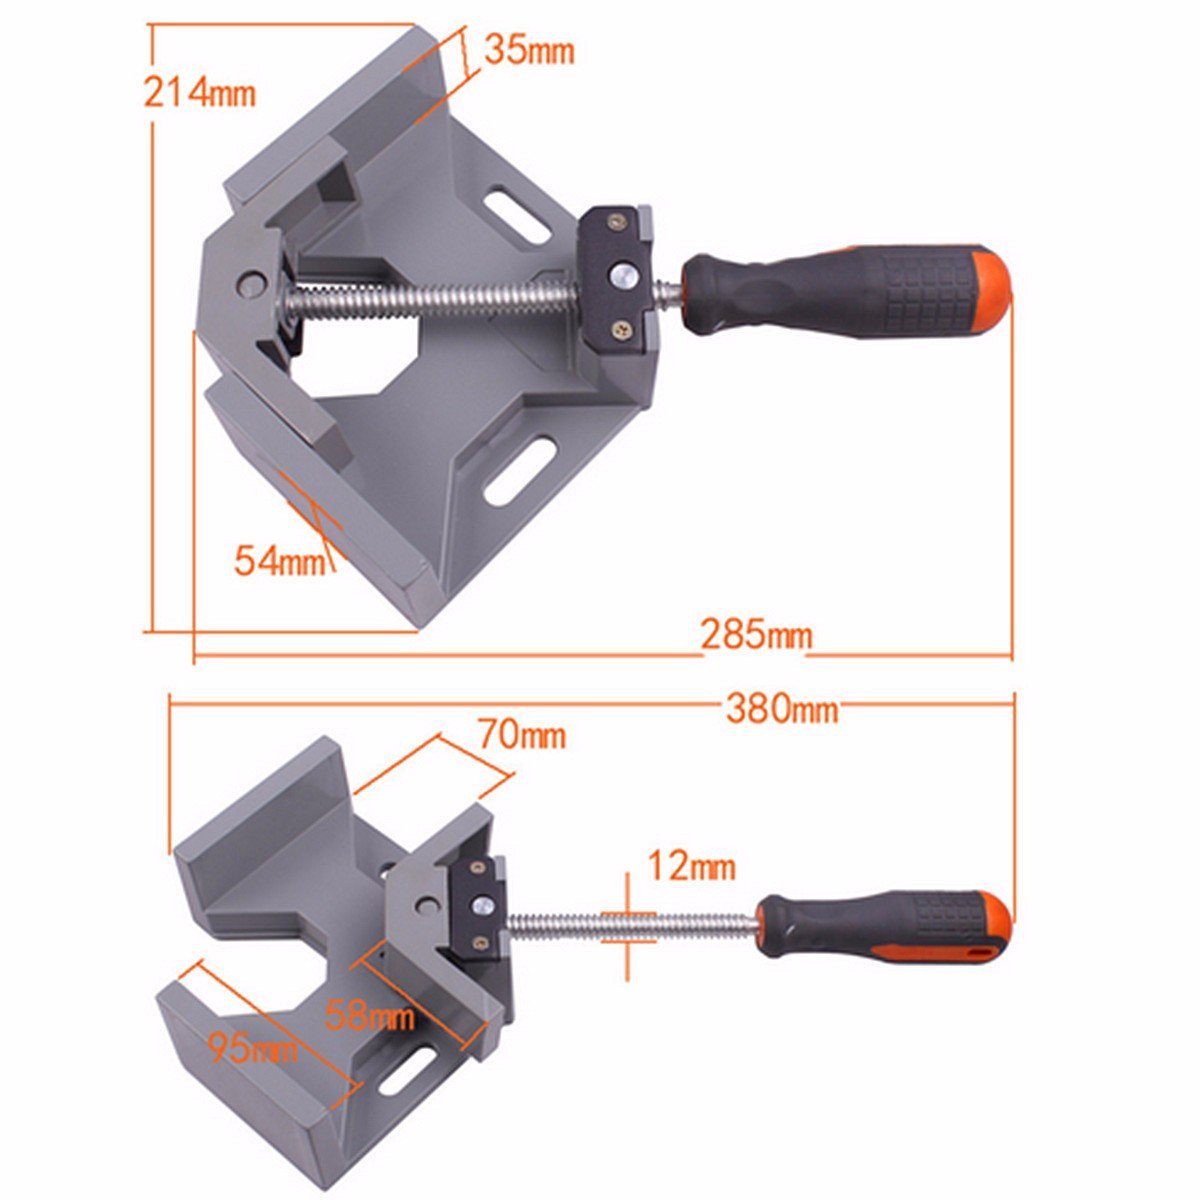 Raitooltrade-90-Degree-Corner-Tool-Right-Angle-Vice-Welding-Wood-Working-Clamps-1192785